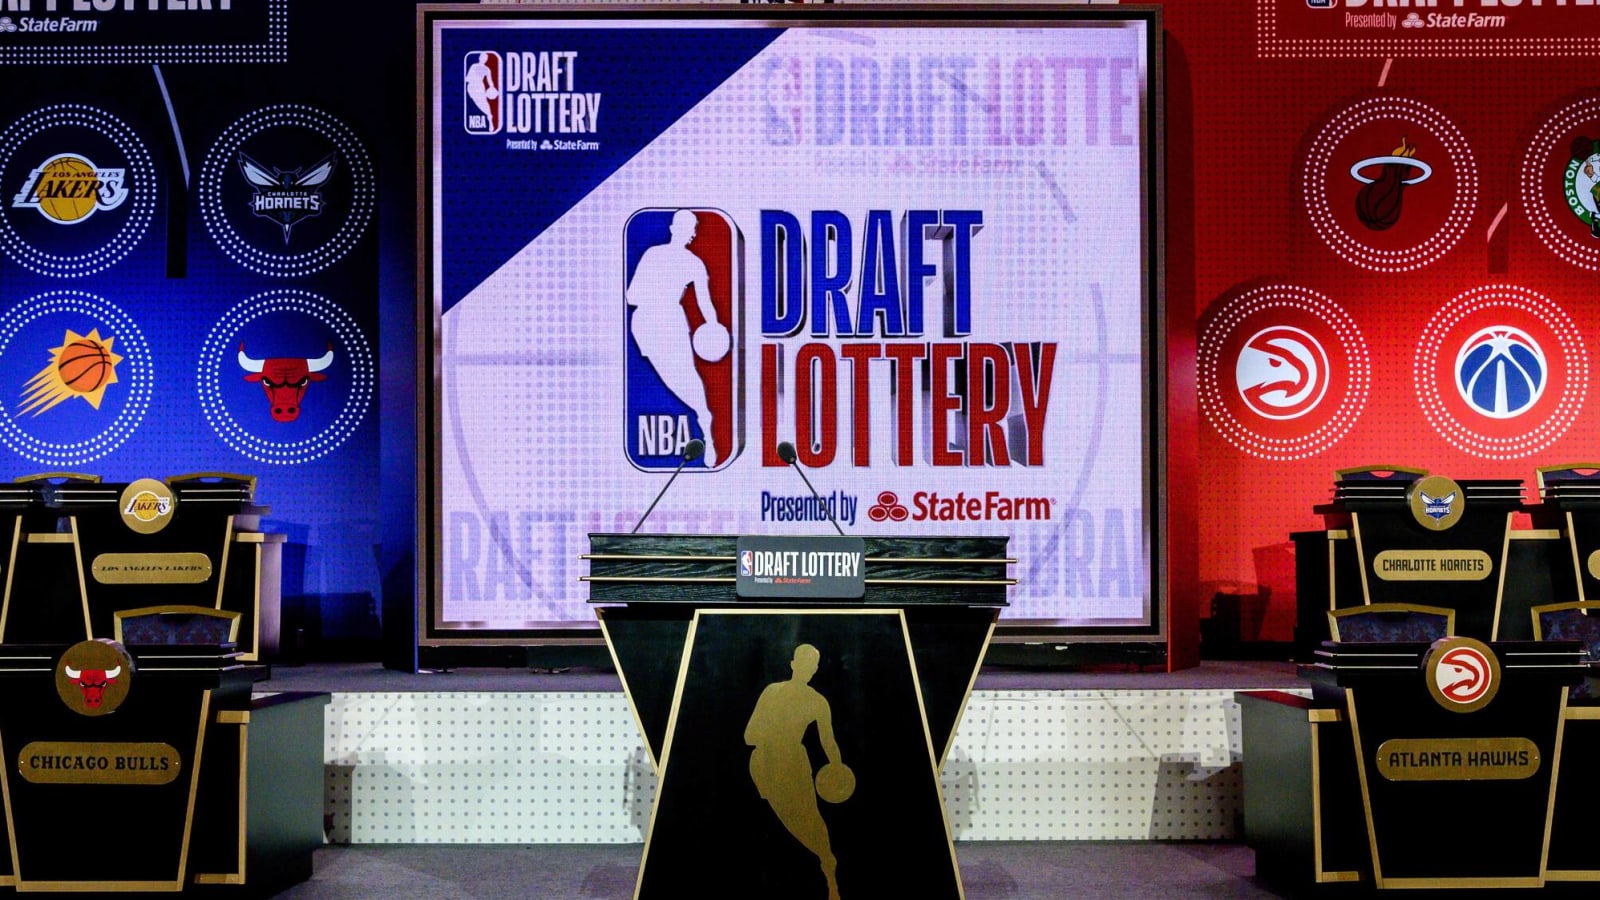 Checking in on 2022 lottery standings, projected draft order